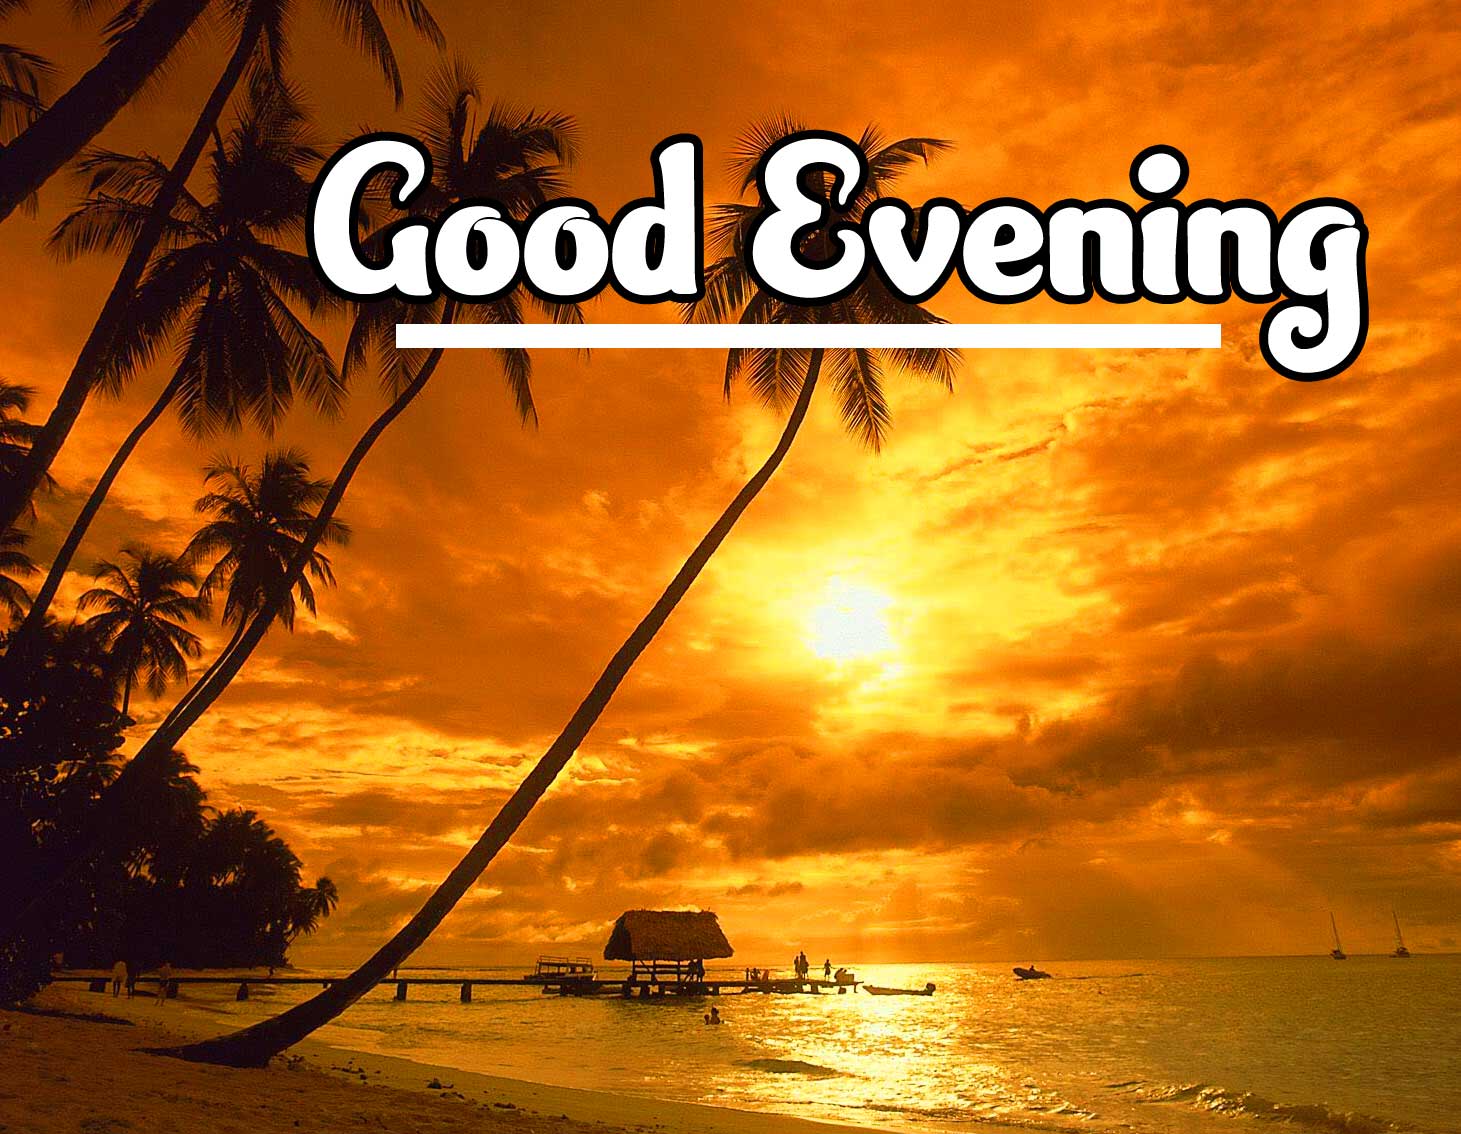 Good Evening Wishes Images Pics Free Download 